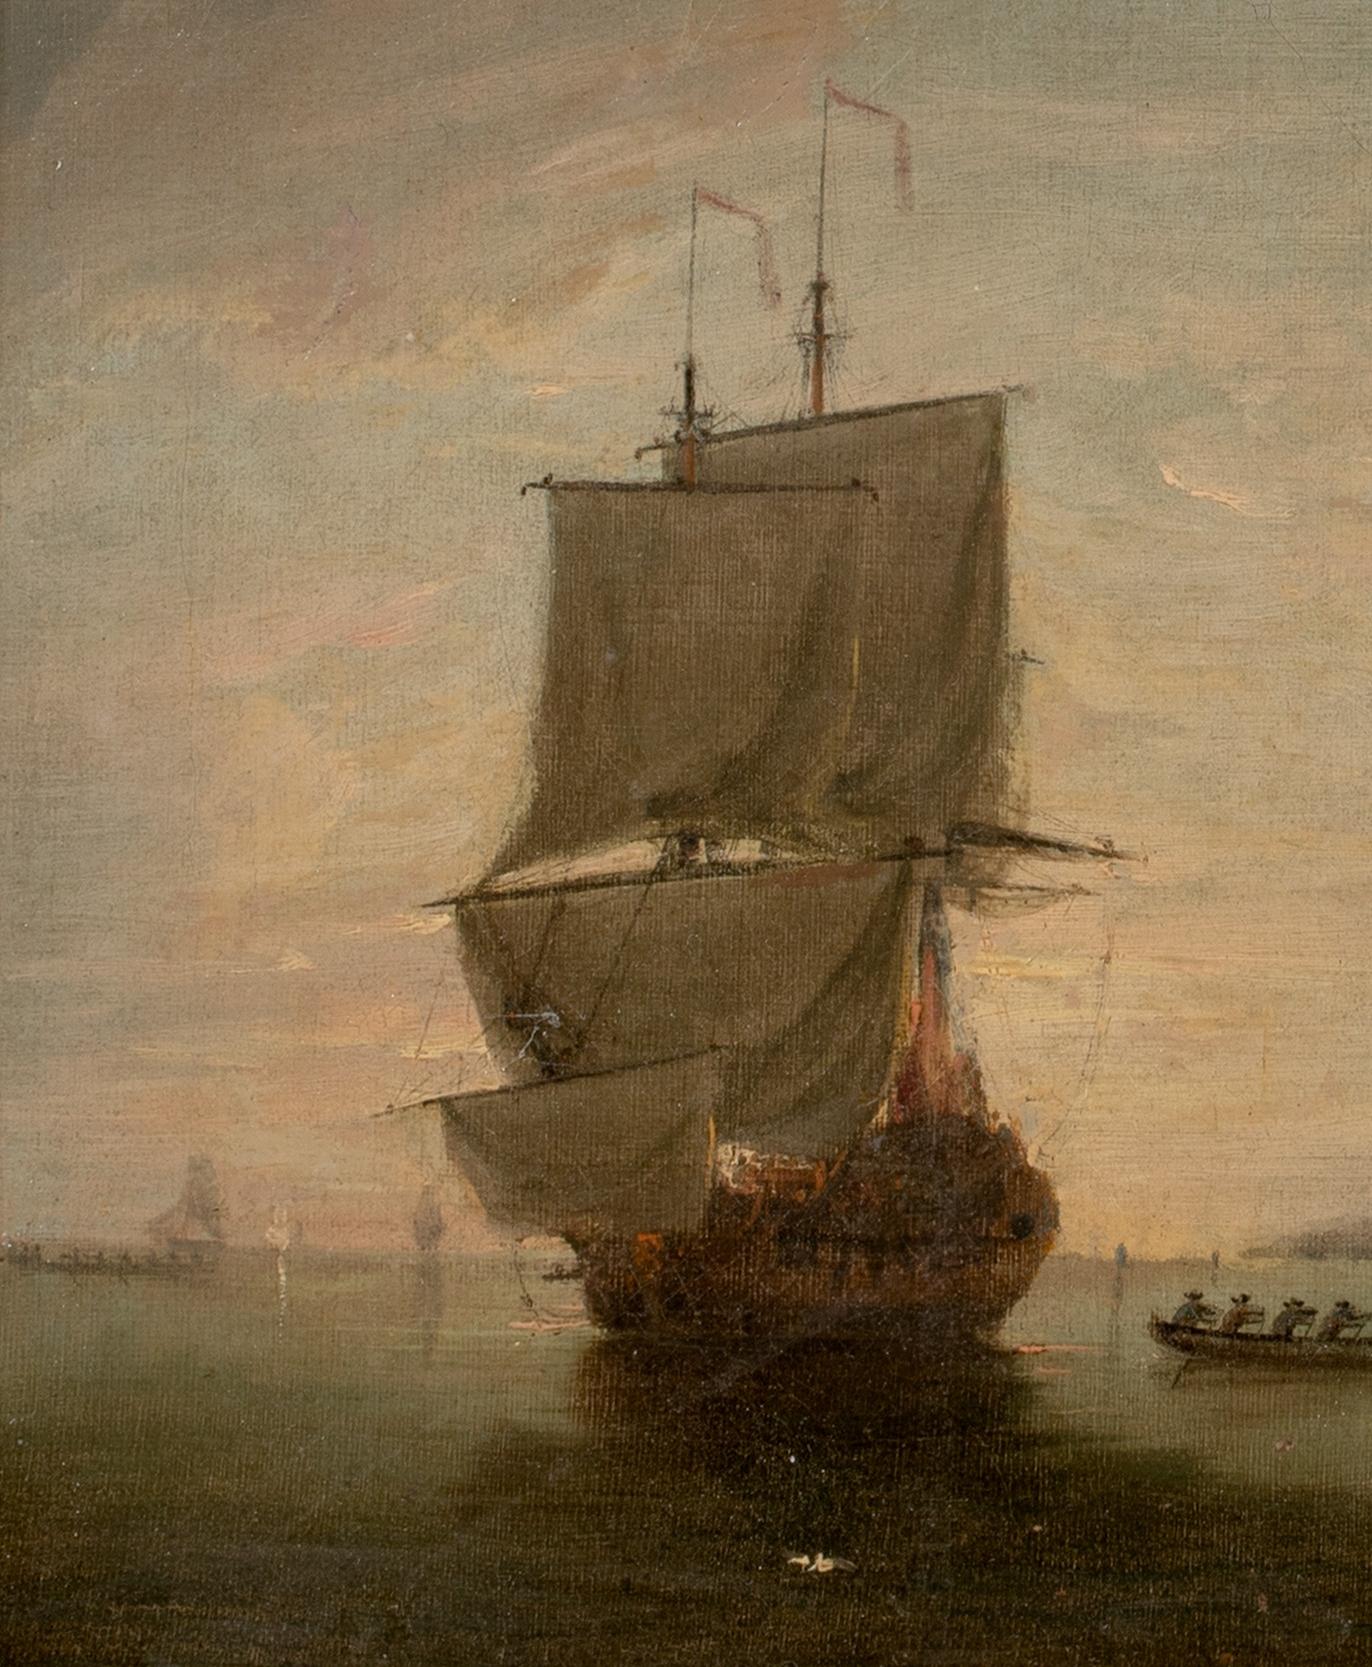 British Royal Navy Fleet Anchored Off The Coast At Sunset, 17th Century 

school of Willem van de Velde (1633-1707)

17th Century marine oil of British Royal Navy warships anchored off the coast at sunset, oil on canvas. Extensive and detailed view